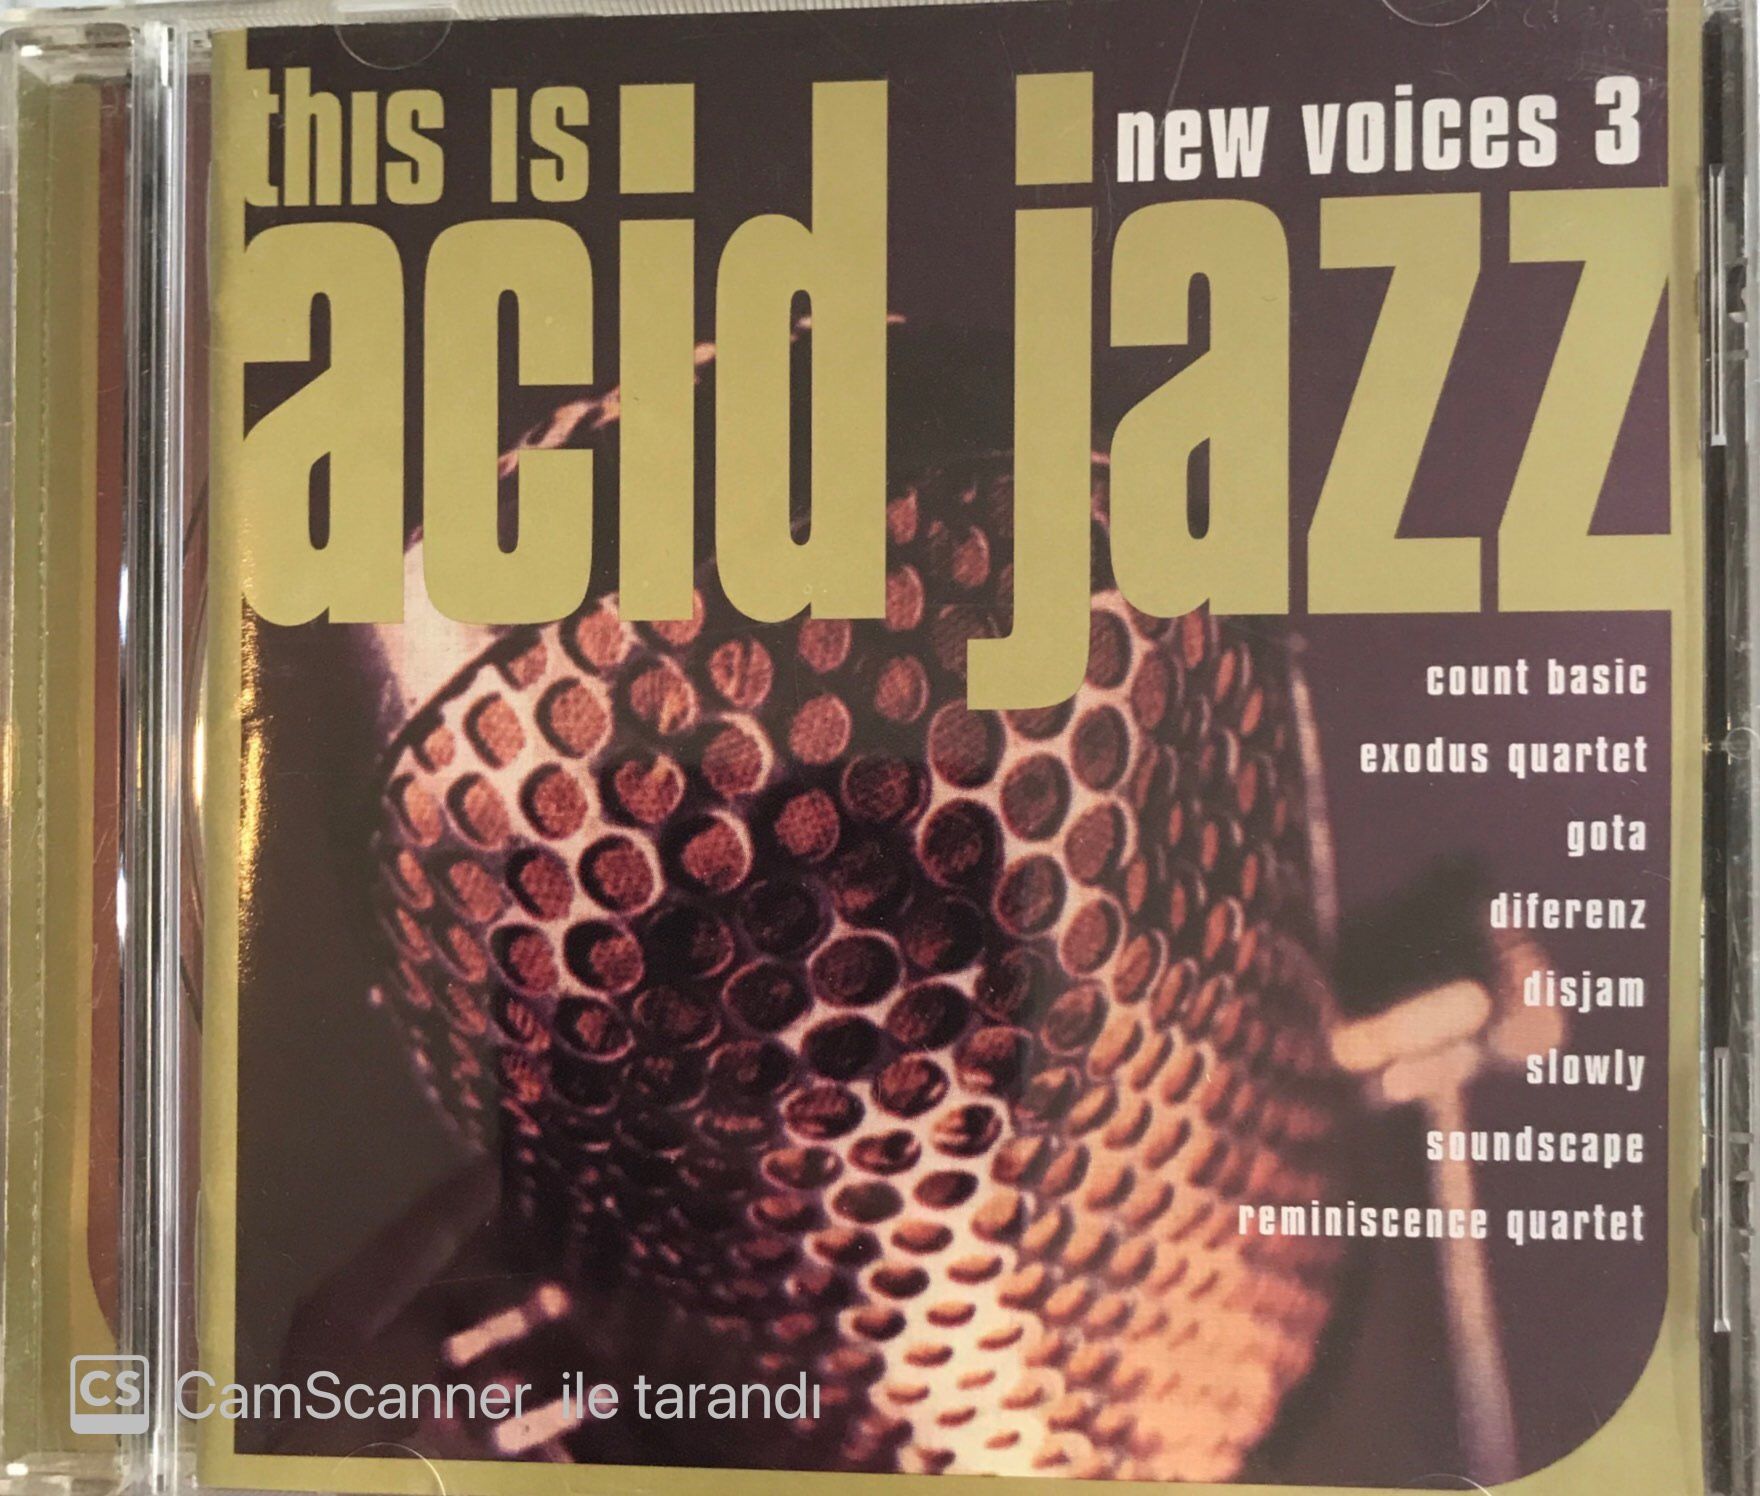 This Is Acid Jazz: New Voices 3 CD